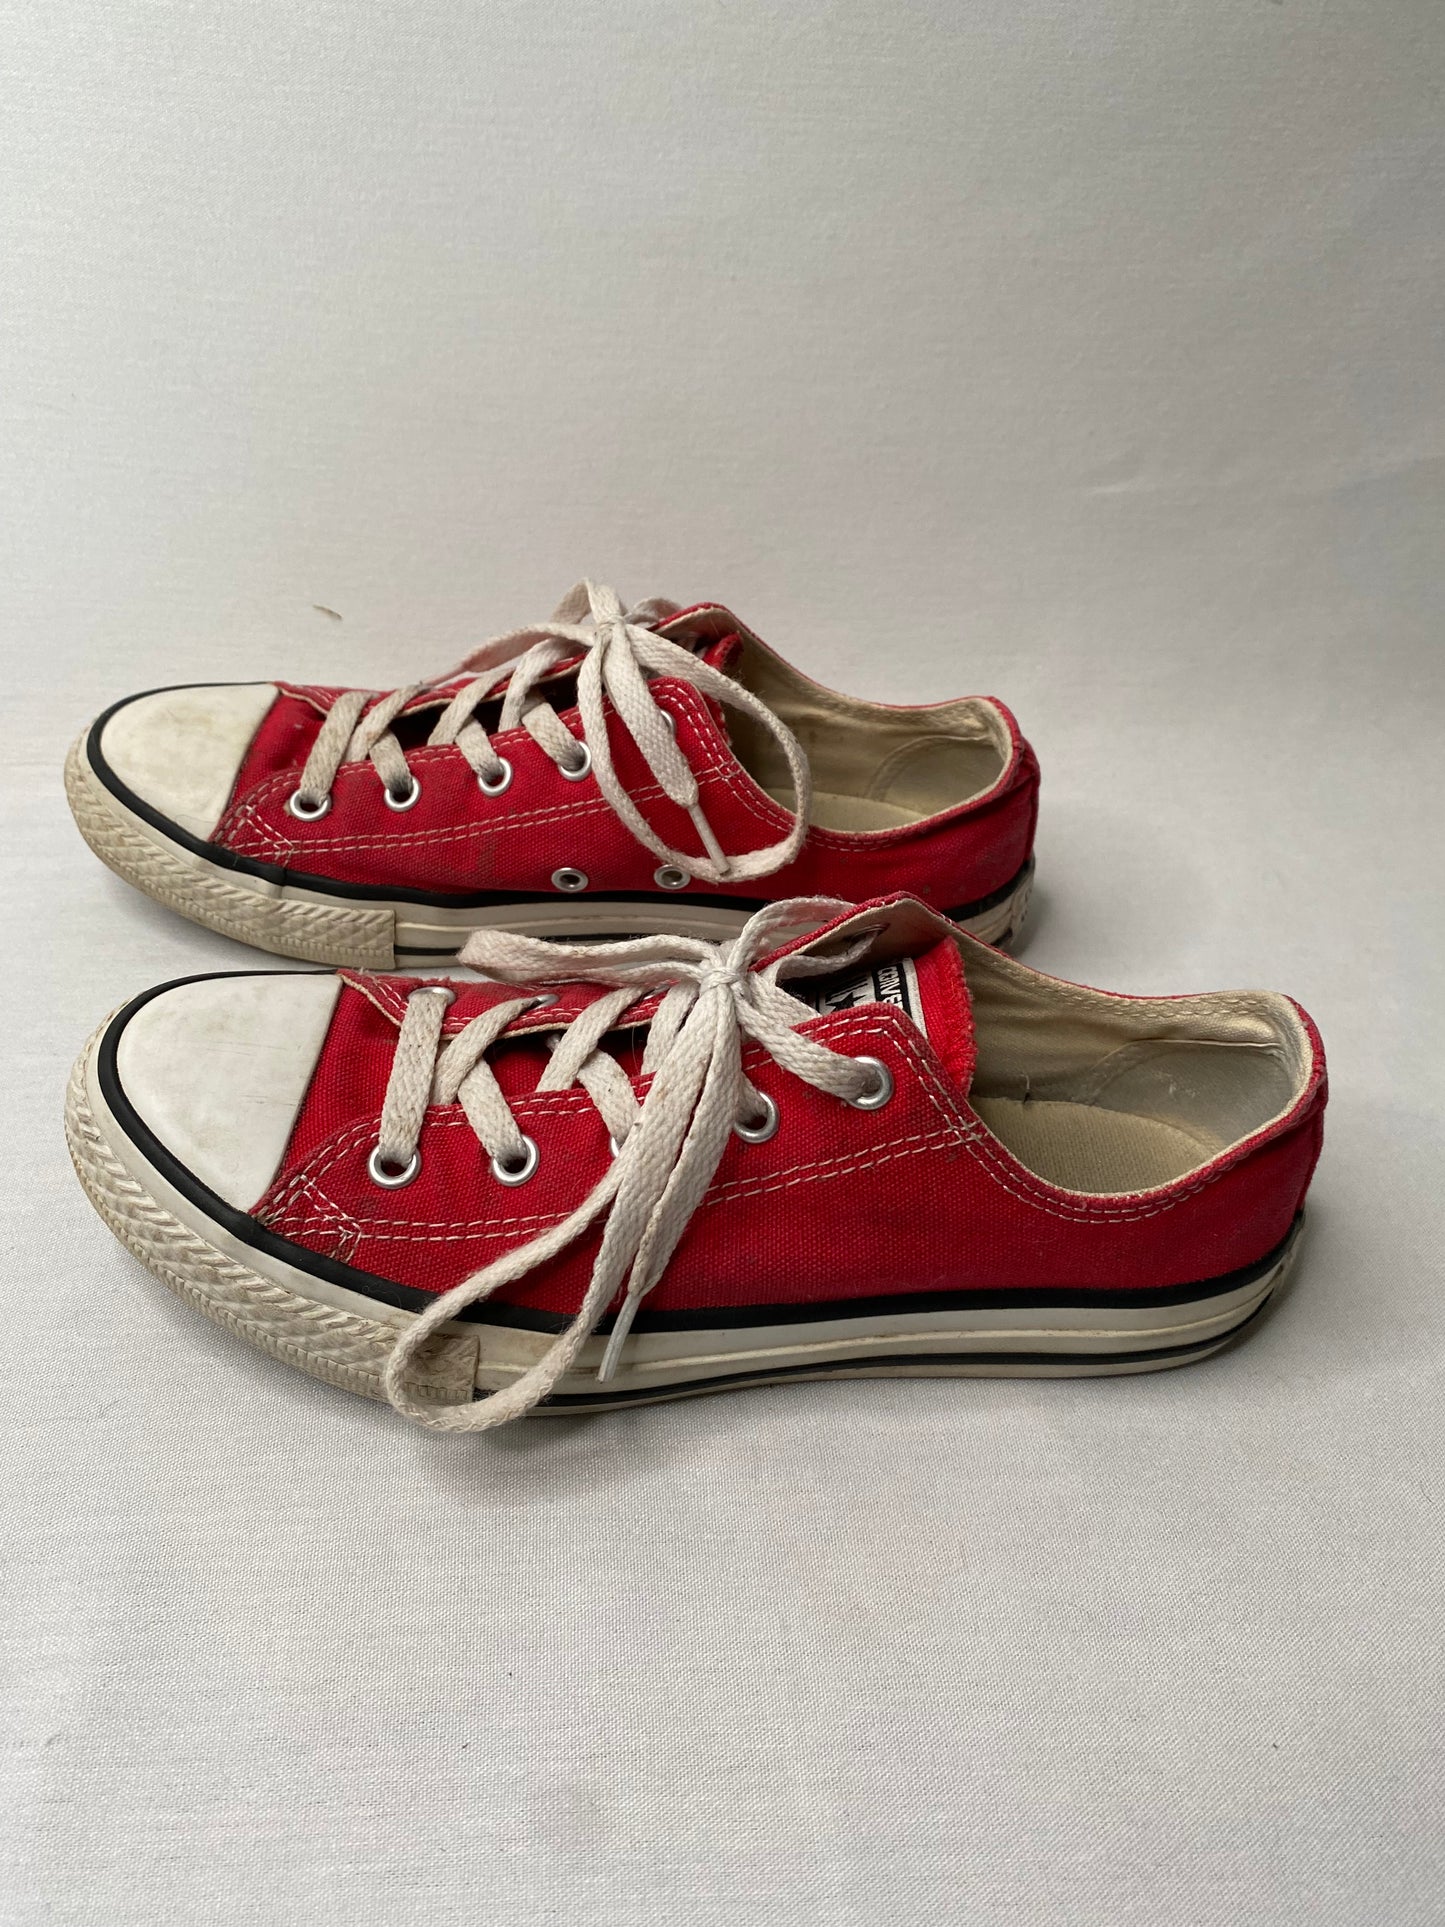 Converse - UK2.5 red canvas trainers